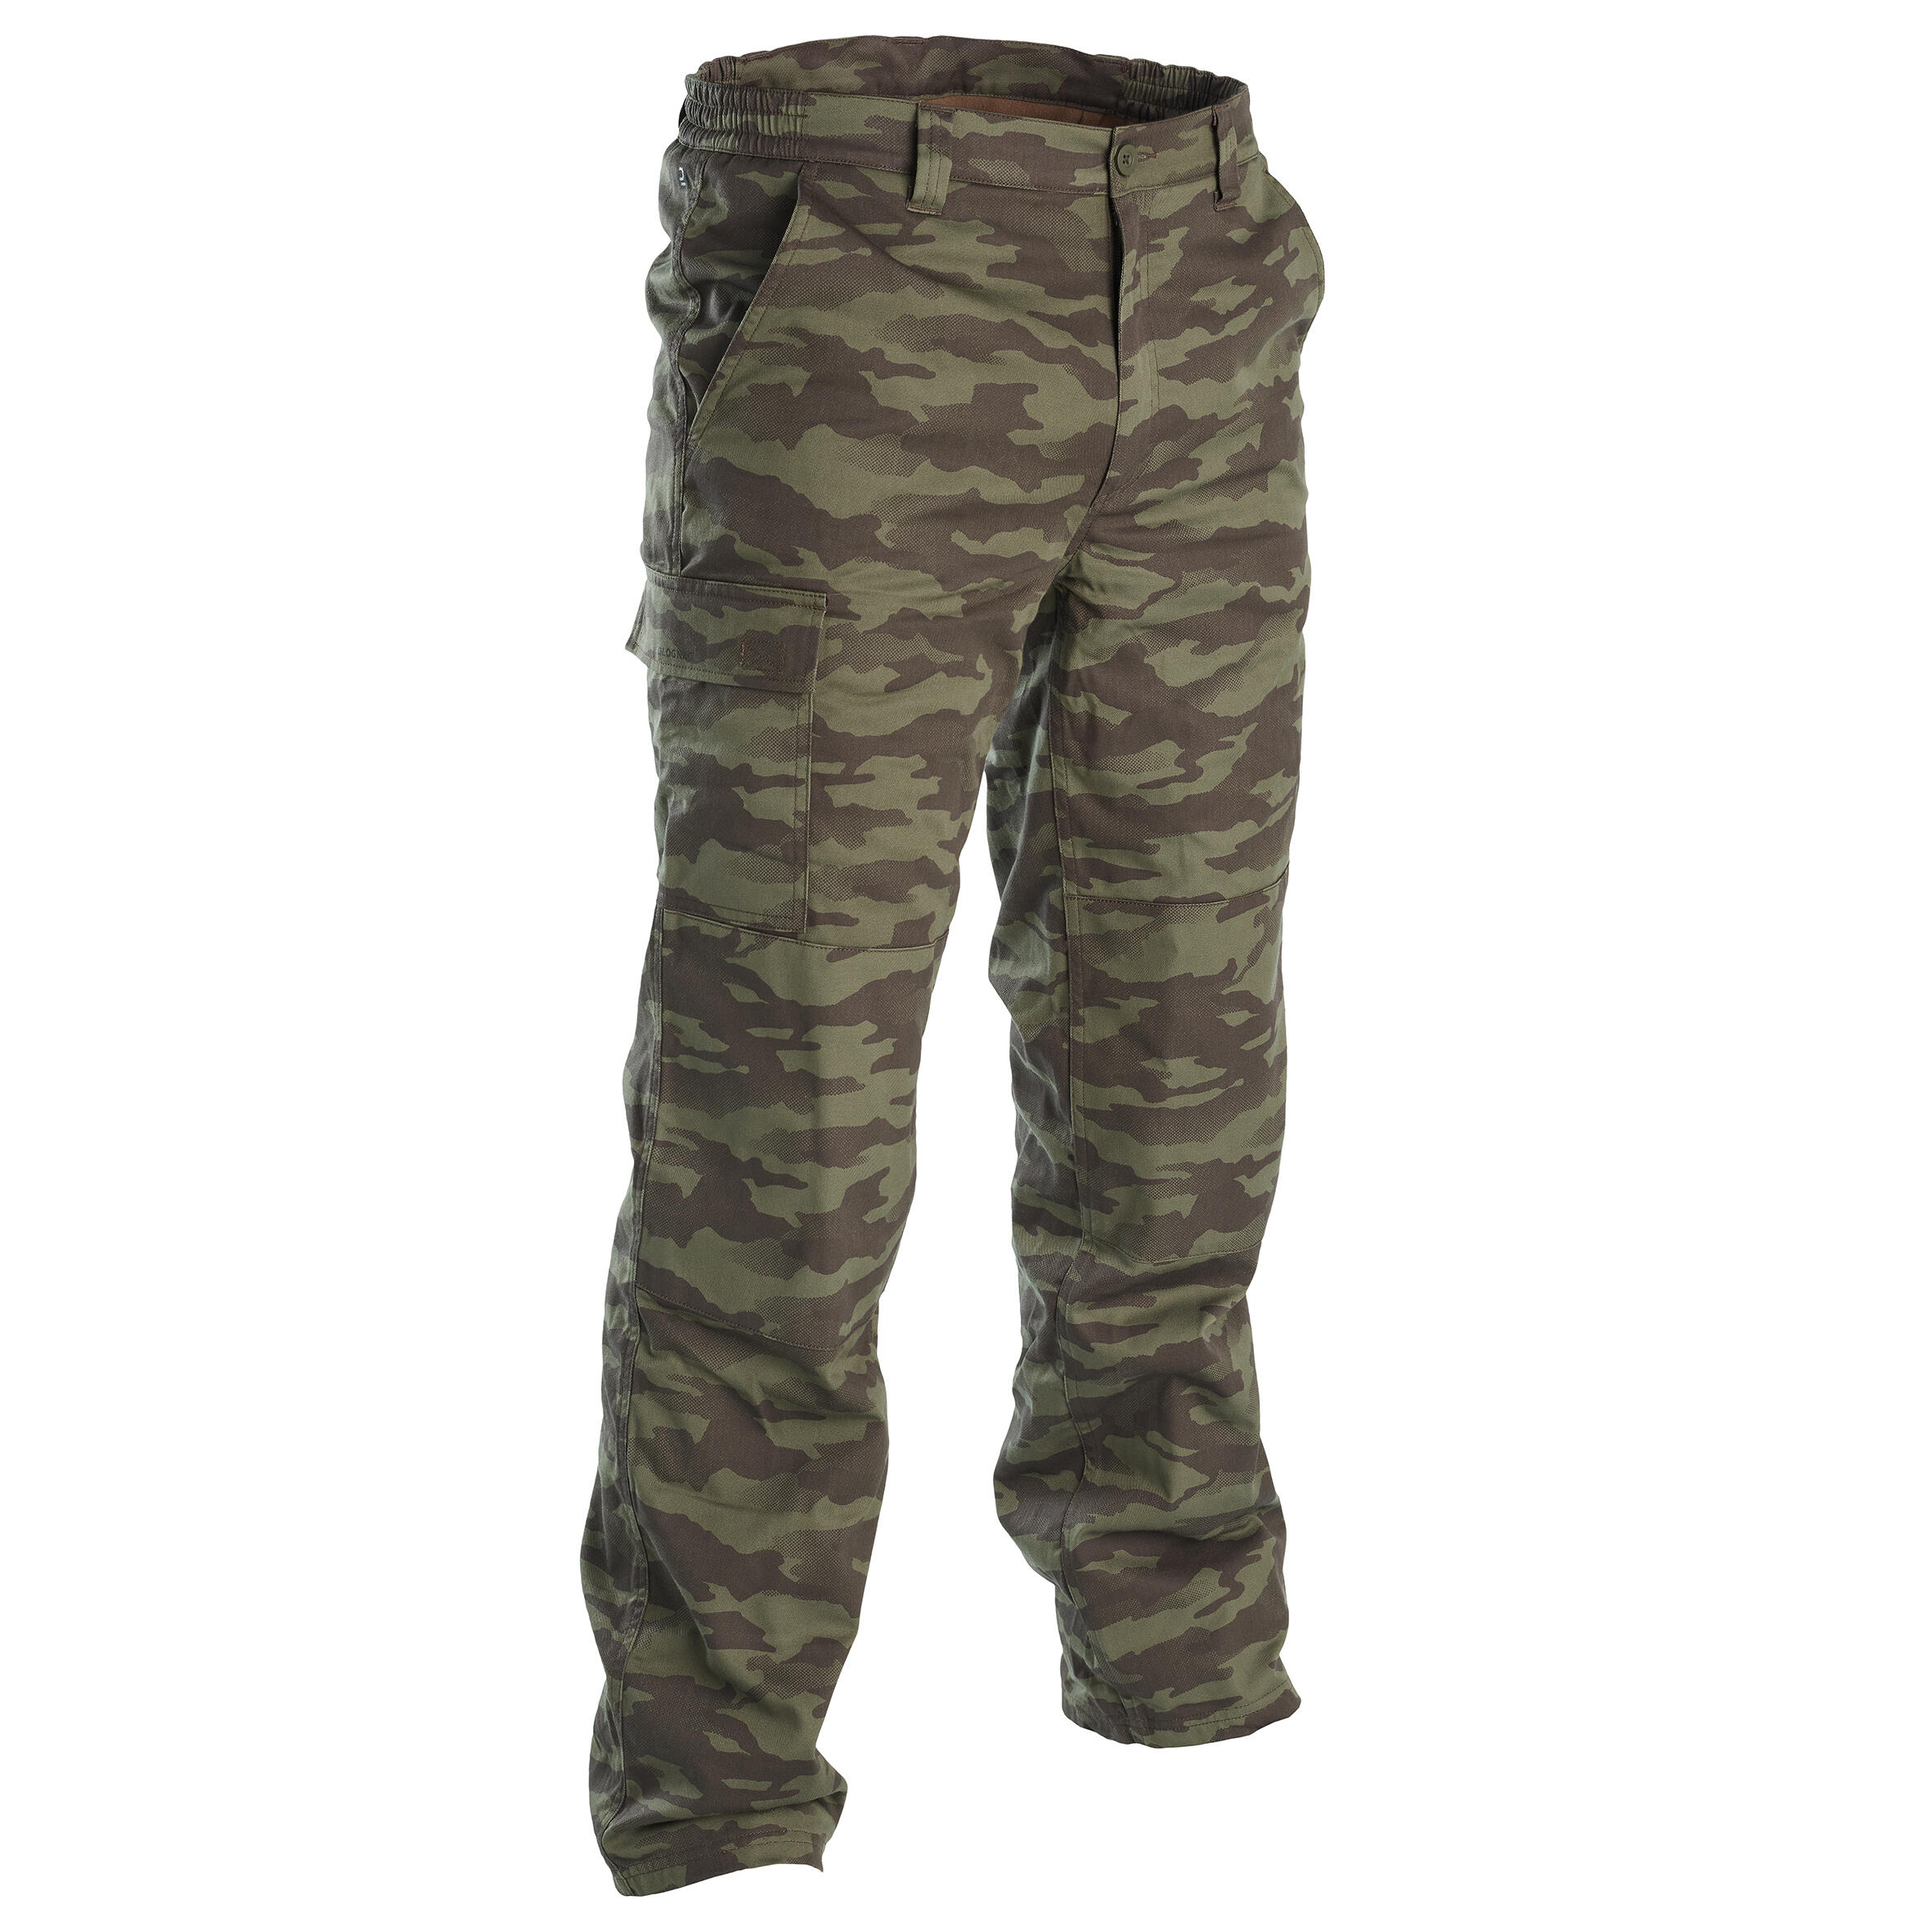 WARM HUNTING TROUSERS CAMOUFLAGE 100 1/10